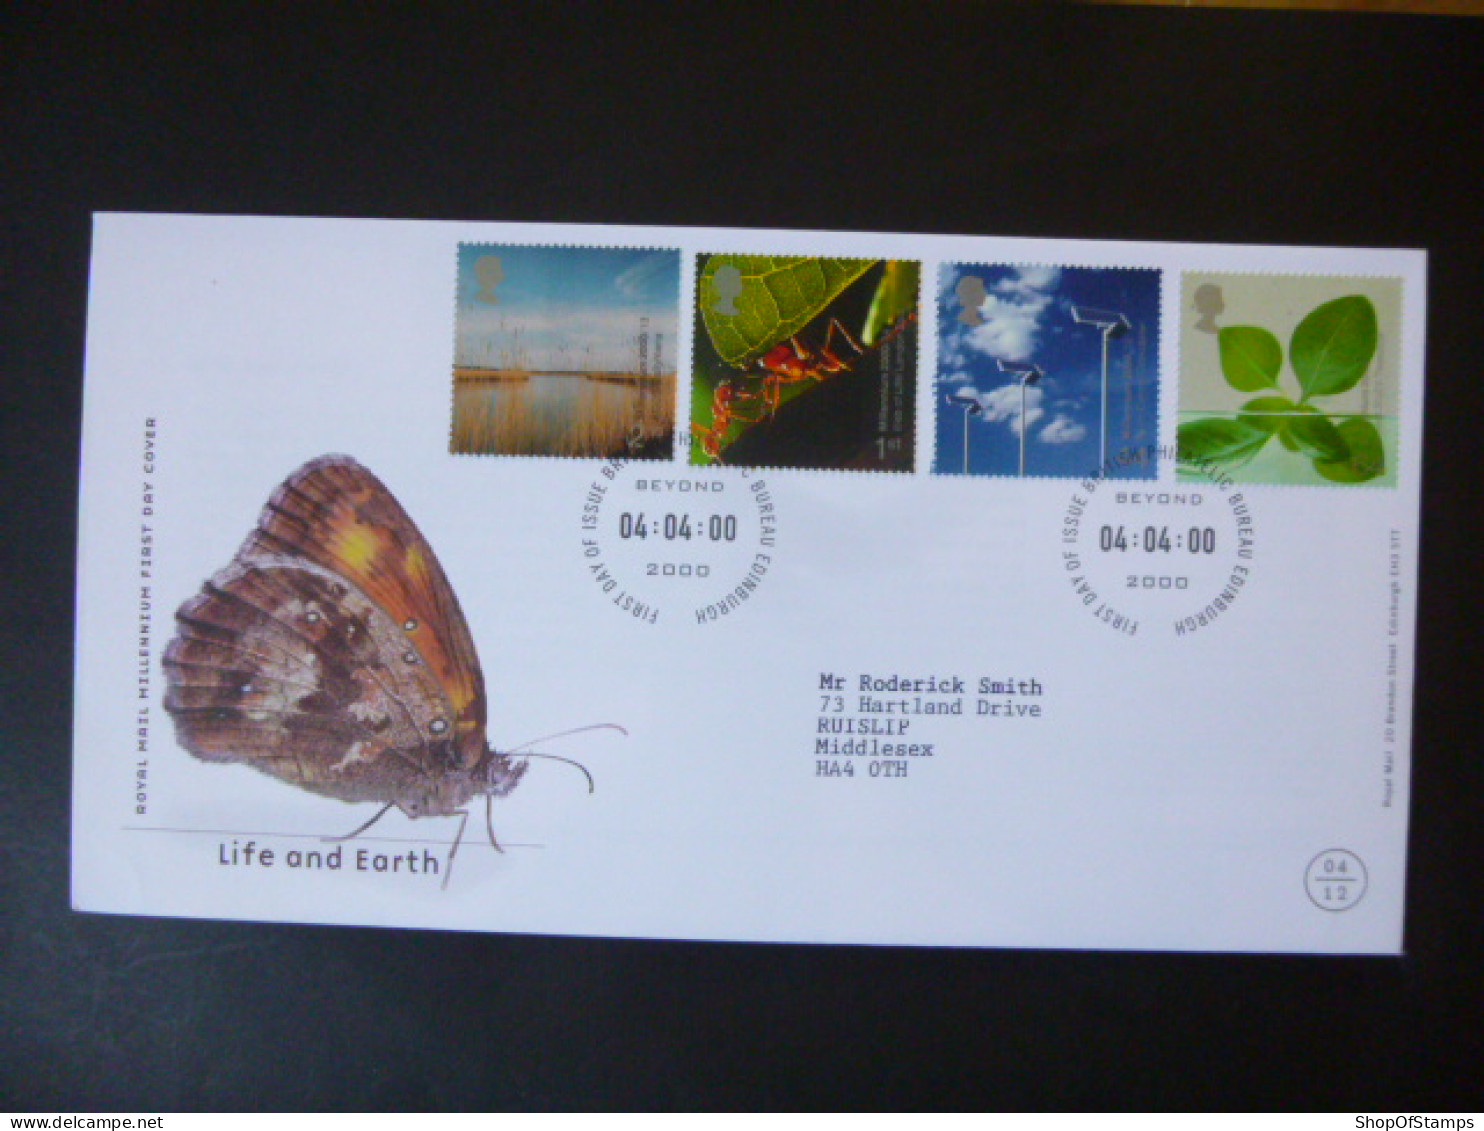 GREAT BRITAIN SG 2138-41 MILLENIUM PROJECTS LIFE AND EARTH FDC EDINBURGH - Unclassified